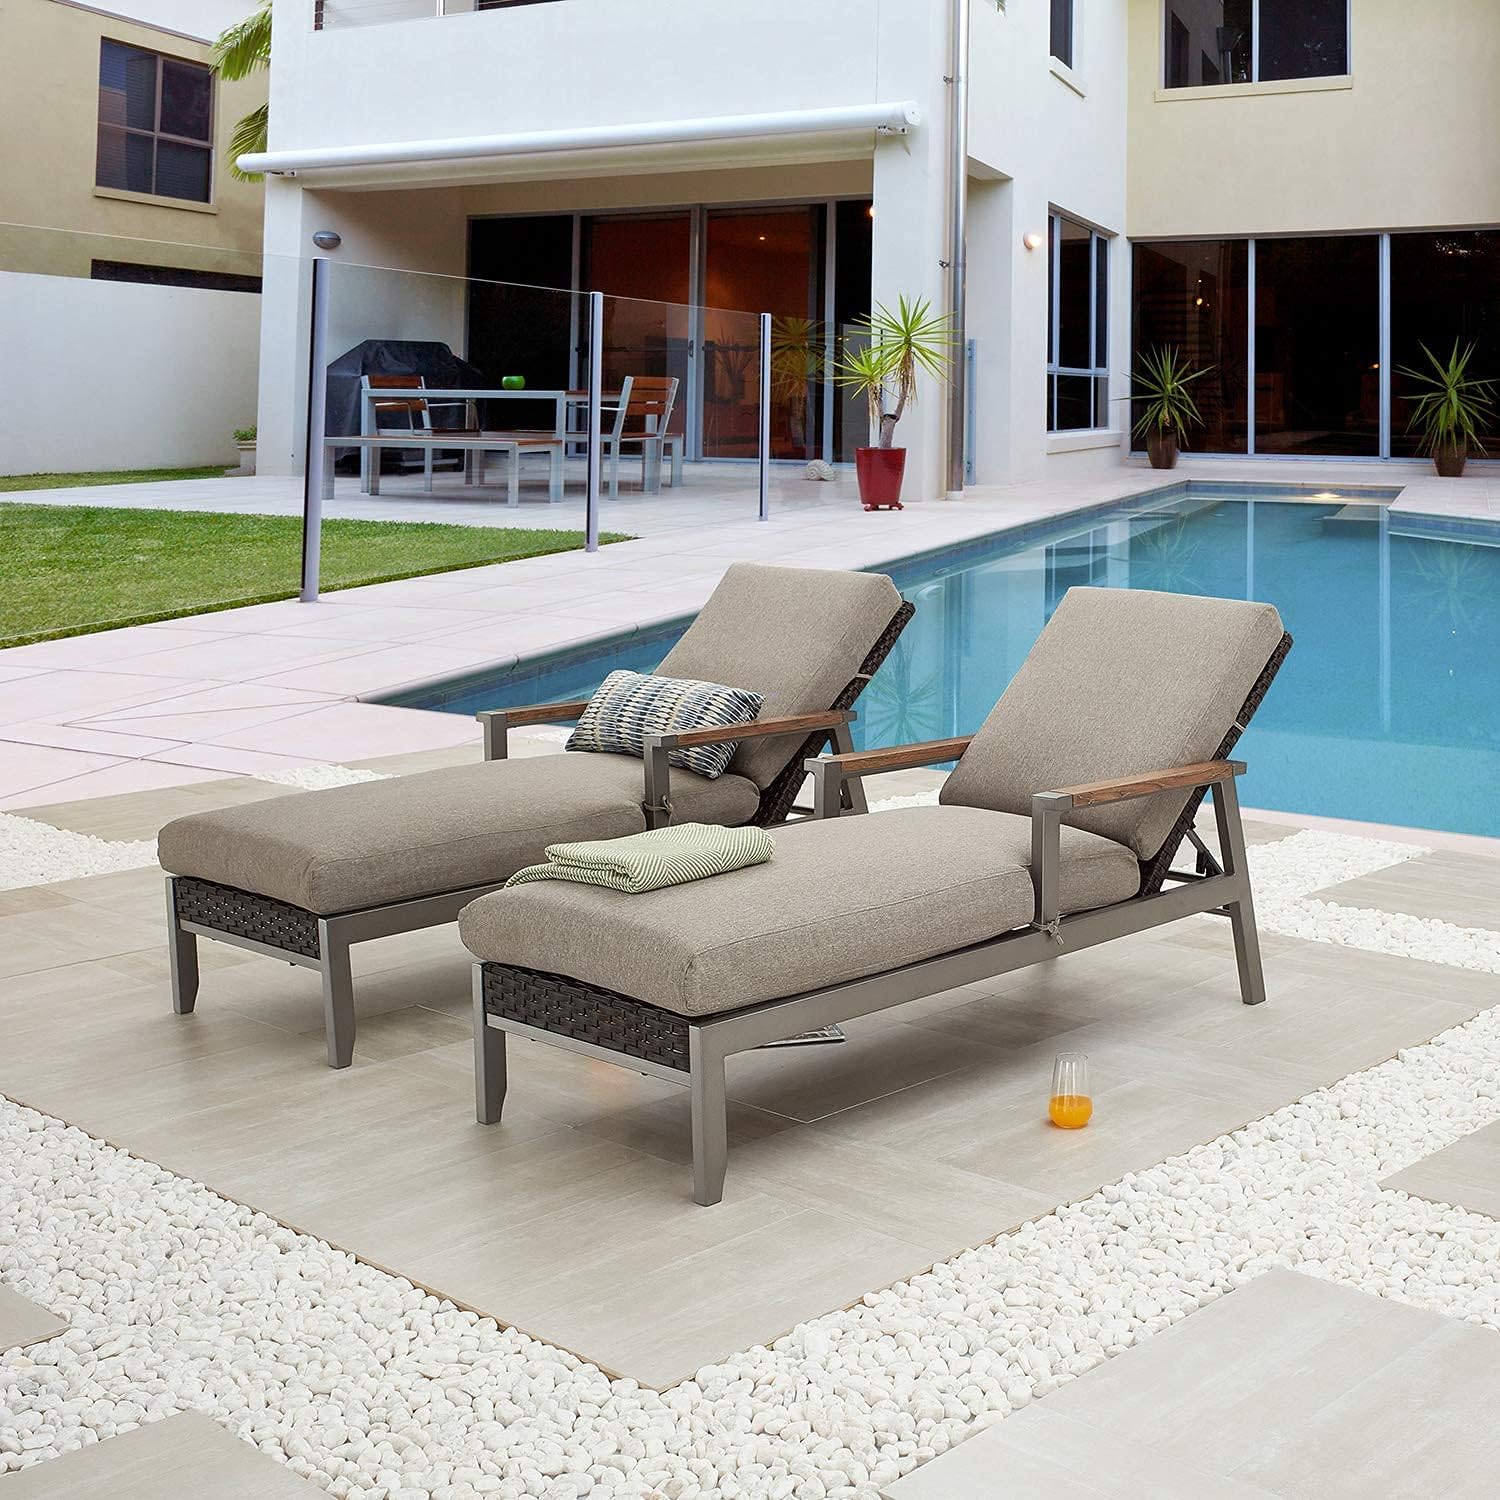 Festival Depot 2 Pieces Outdoor Patio Chaise Rattan Wicker Lounge Chair with Adjustable Back and Removable Cushions for Poolside Backyard Lawn, Dark Grey